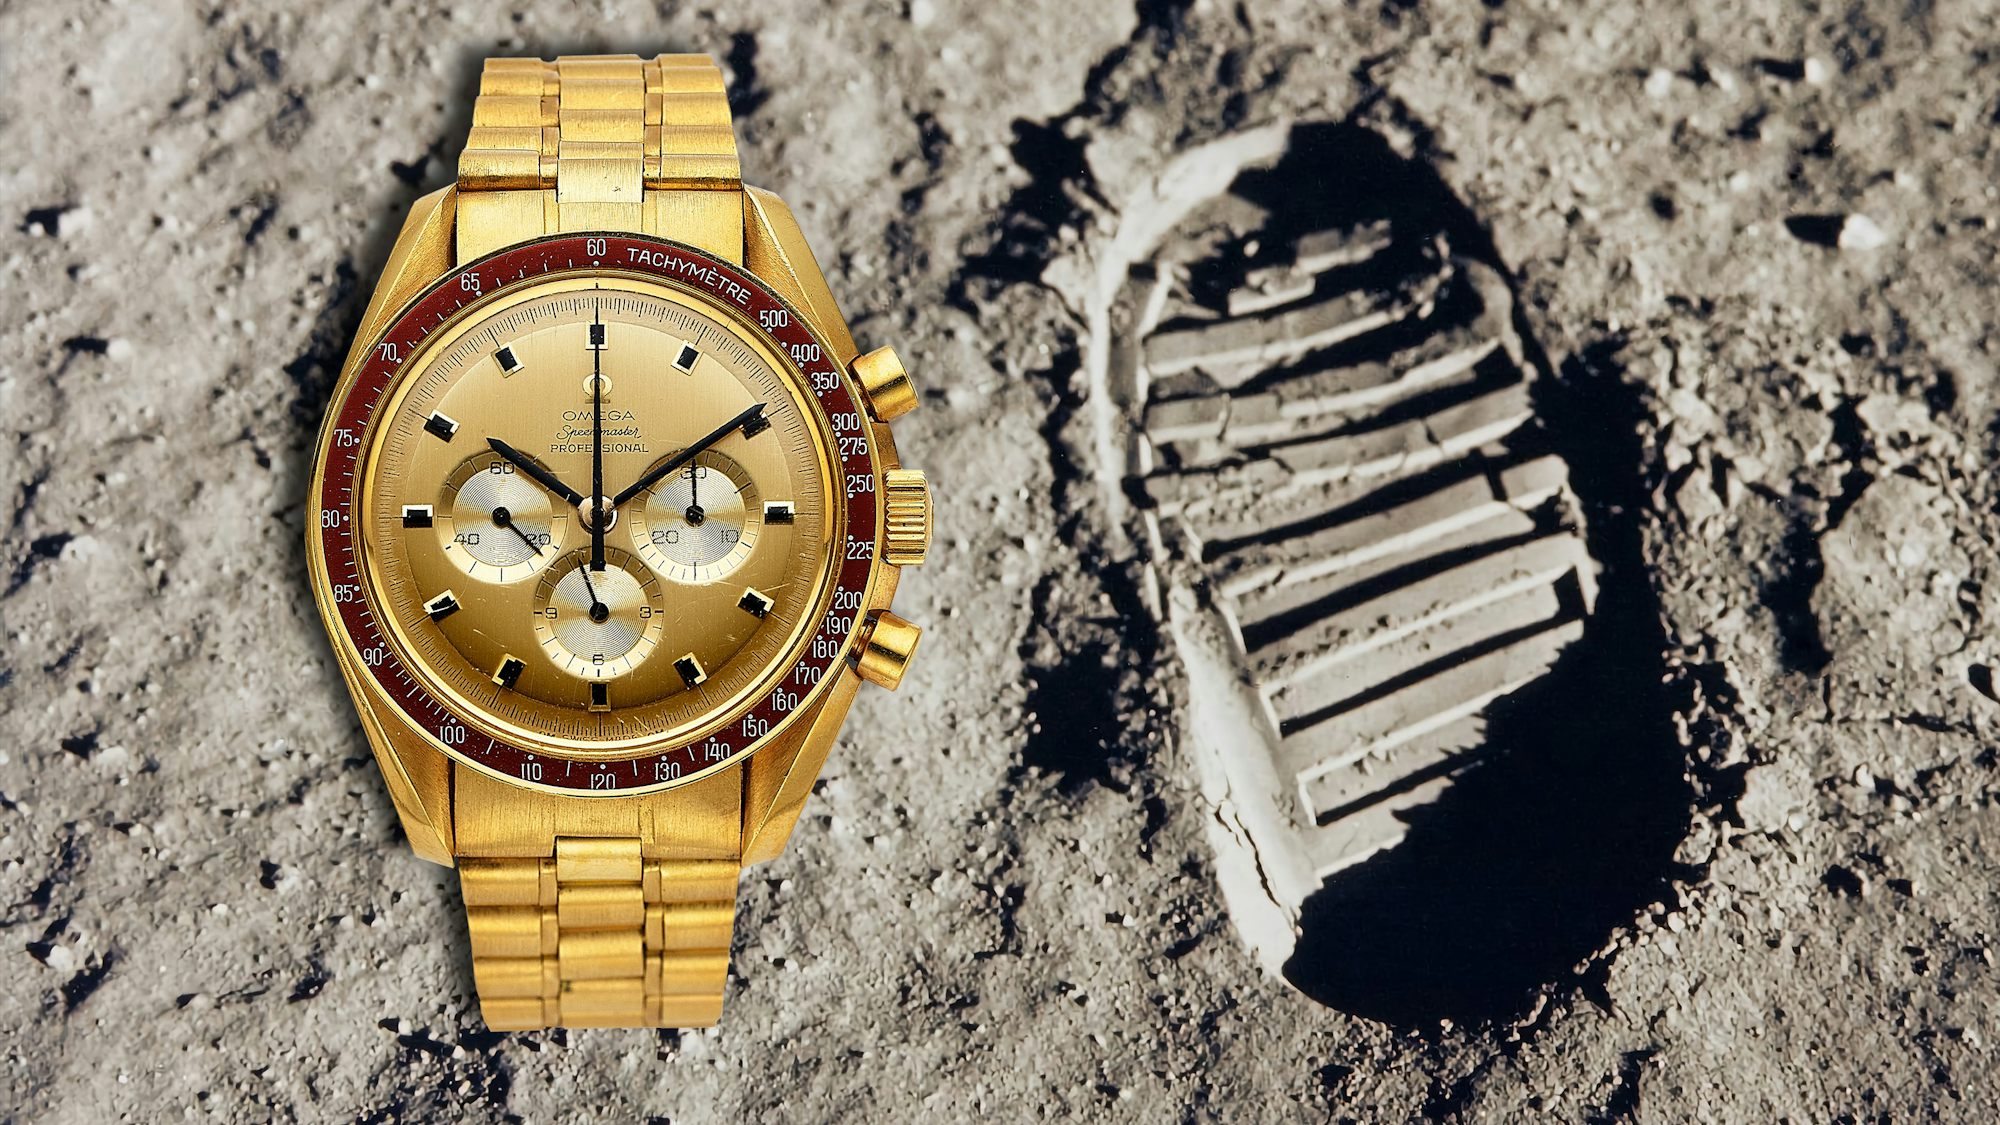 Auctions: There's Still Time To Bid On Astronaut Michael Collins' Gold Speedmaster